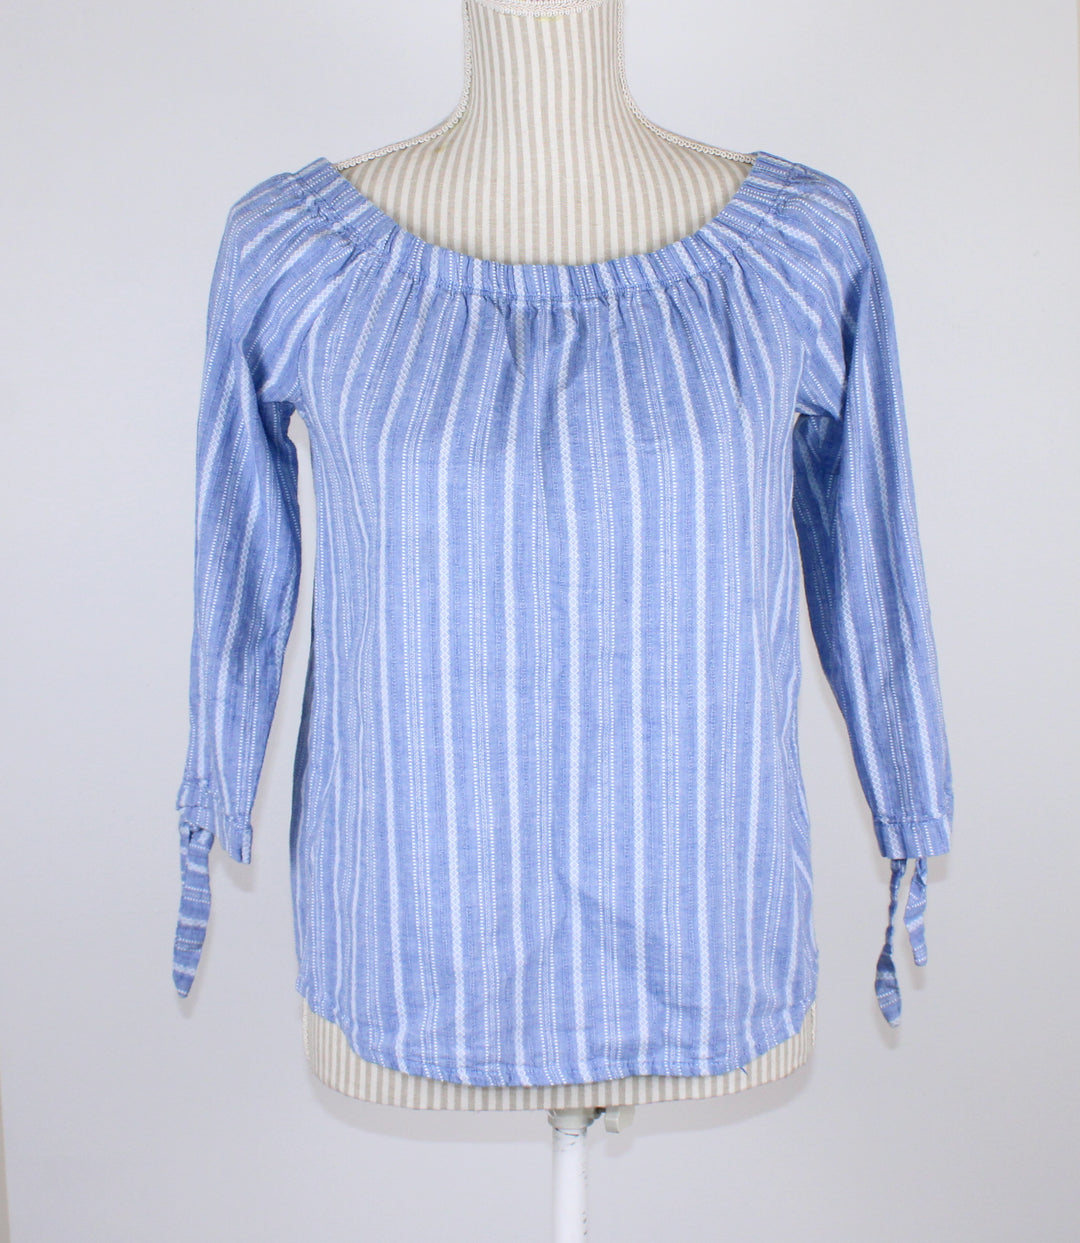 MY STYLE BLUE STRIPED TOP LADIES SMALL EUC